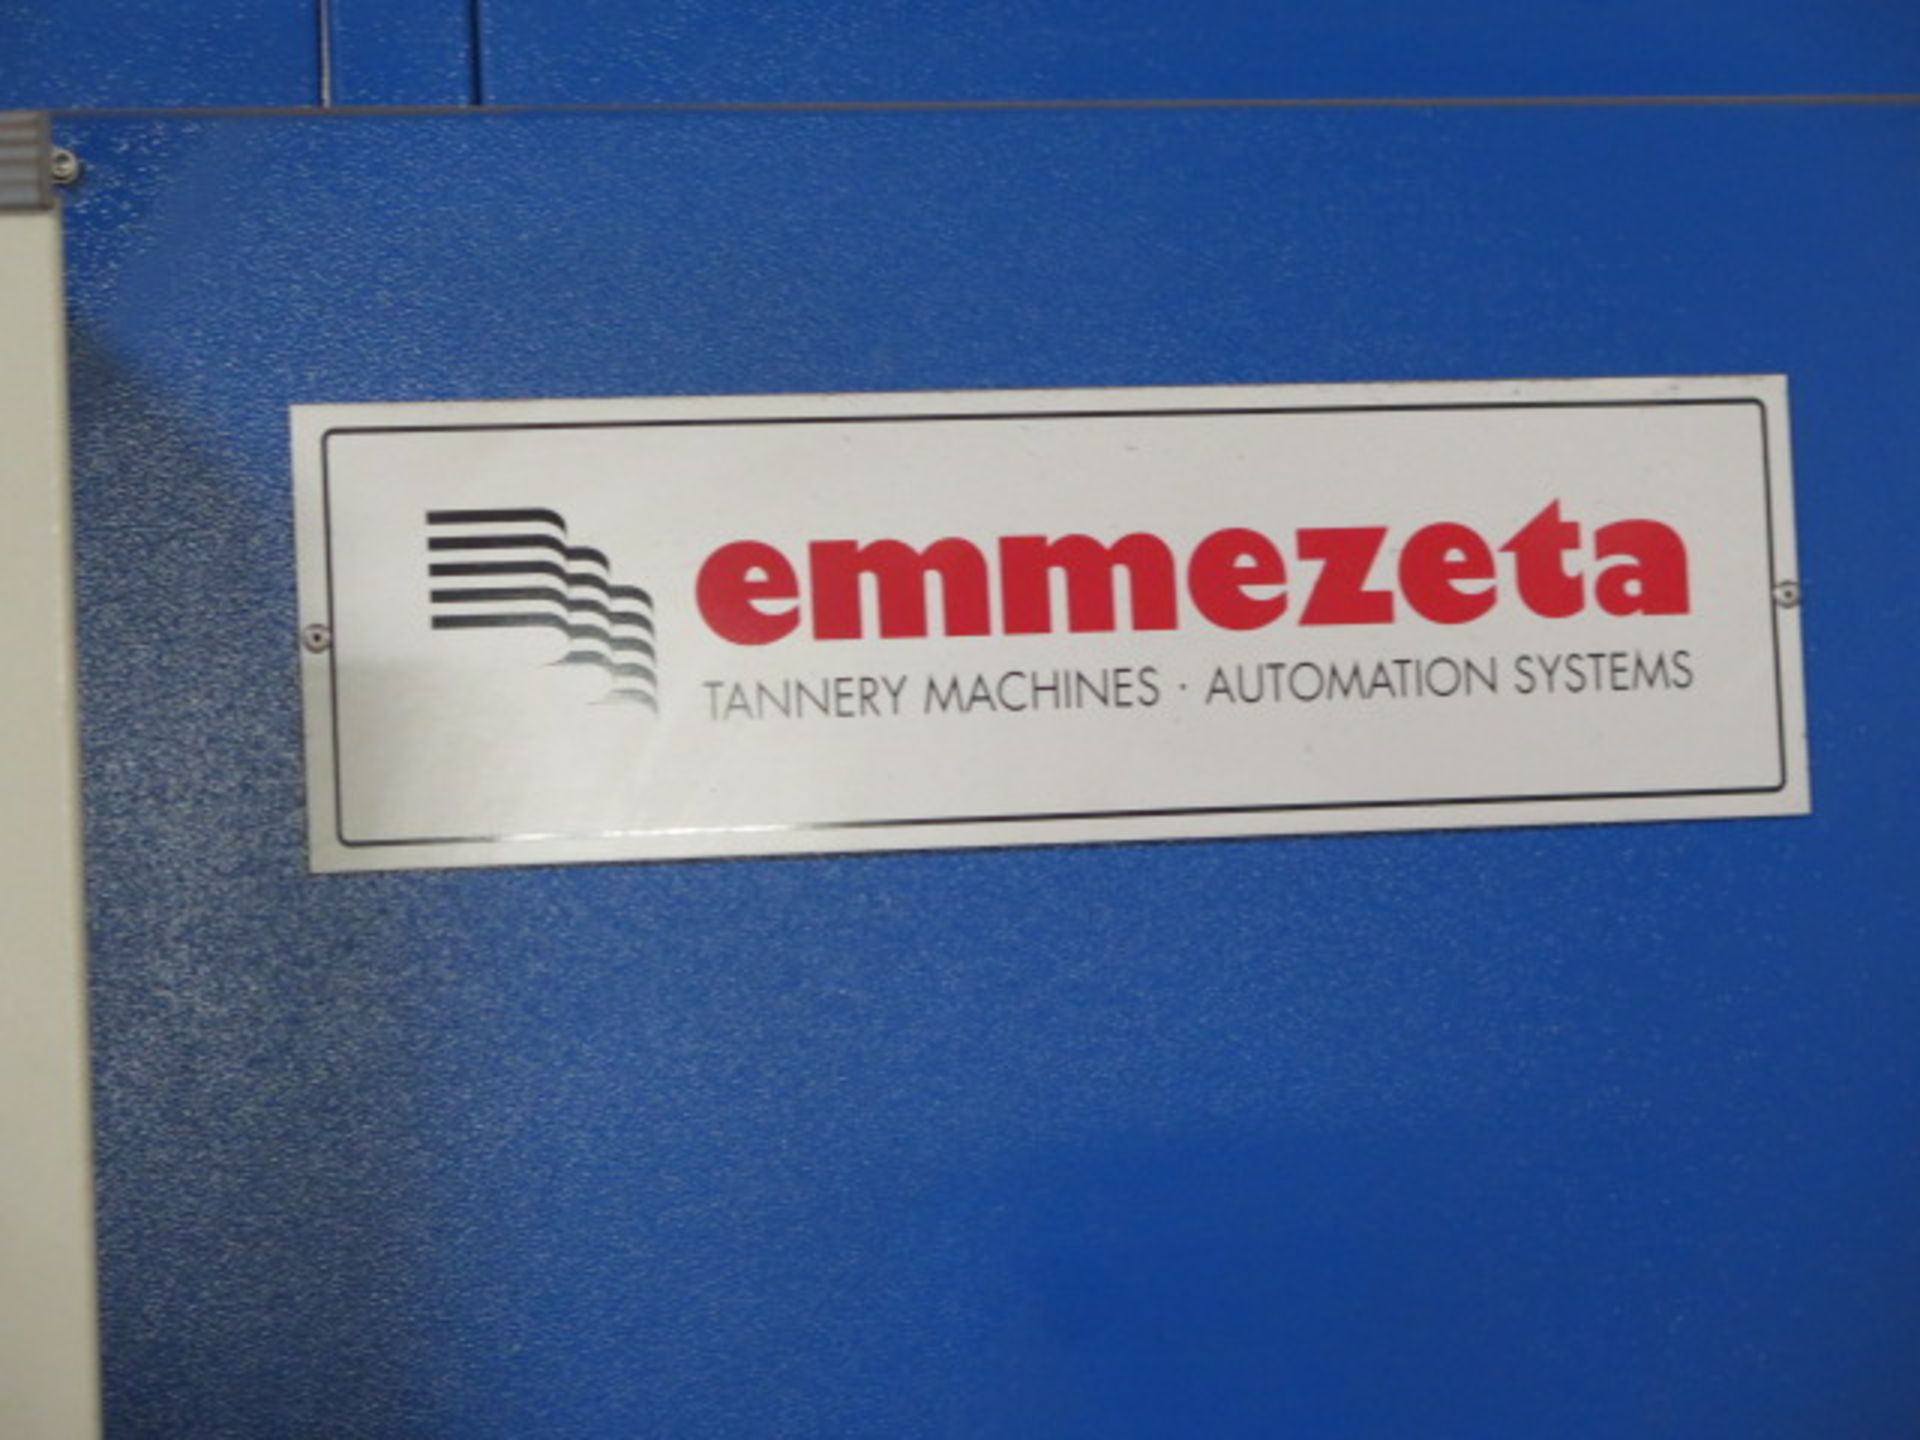 2003 Emmezeta Tannery mdl. STEN 3217L 3-Meter Universal Stacker s/n 1584 w/ PLC Controls, SOLD AS IS - Image 12 of 13